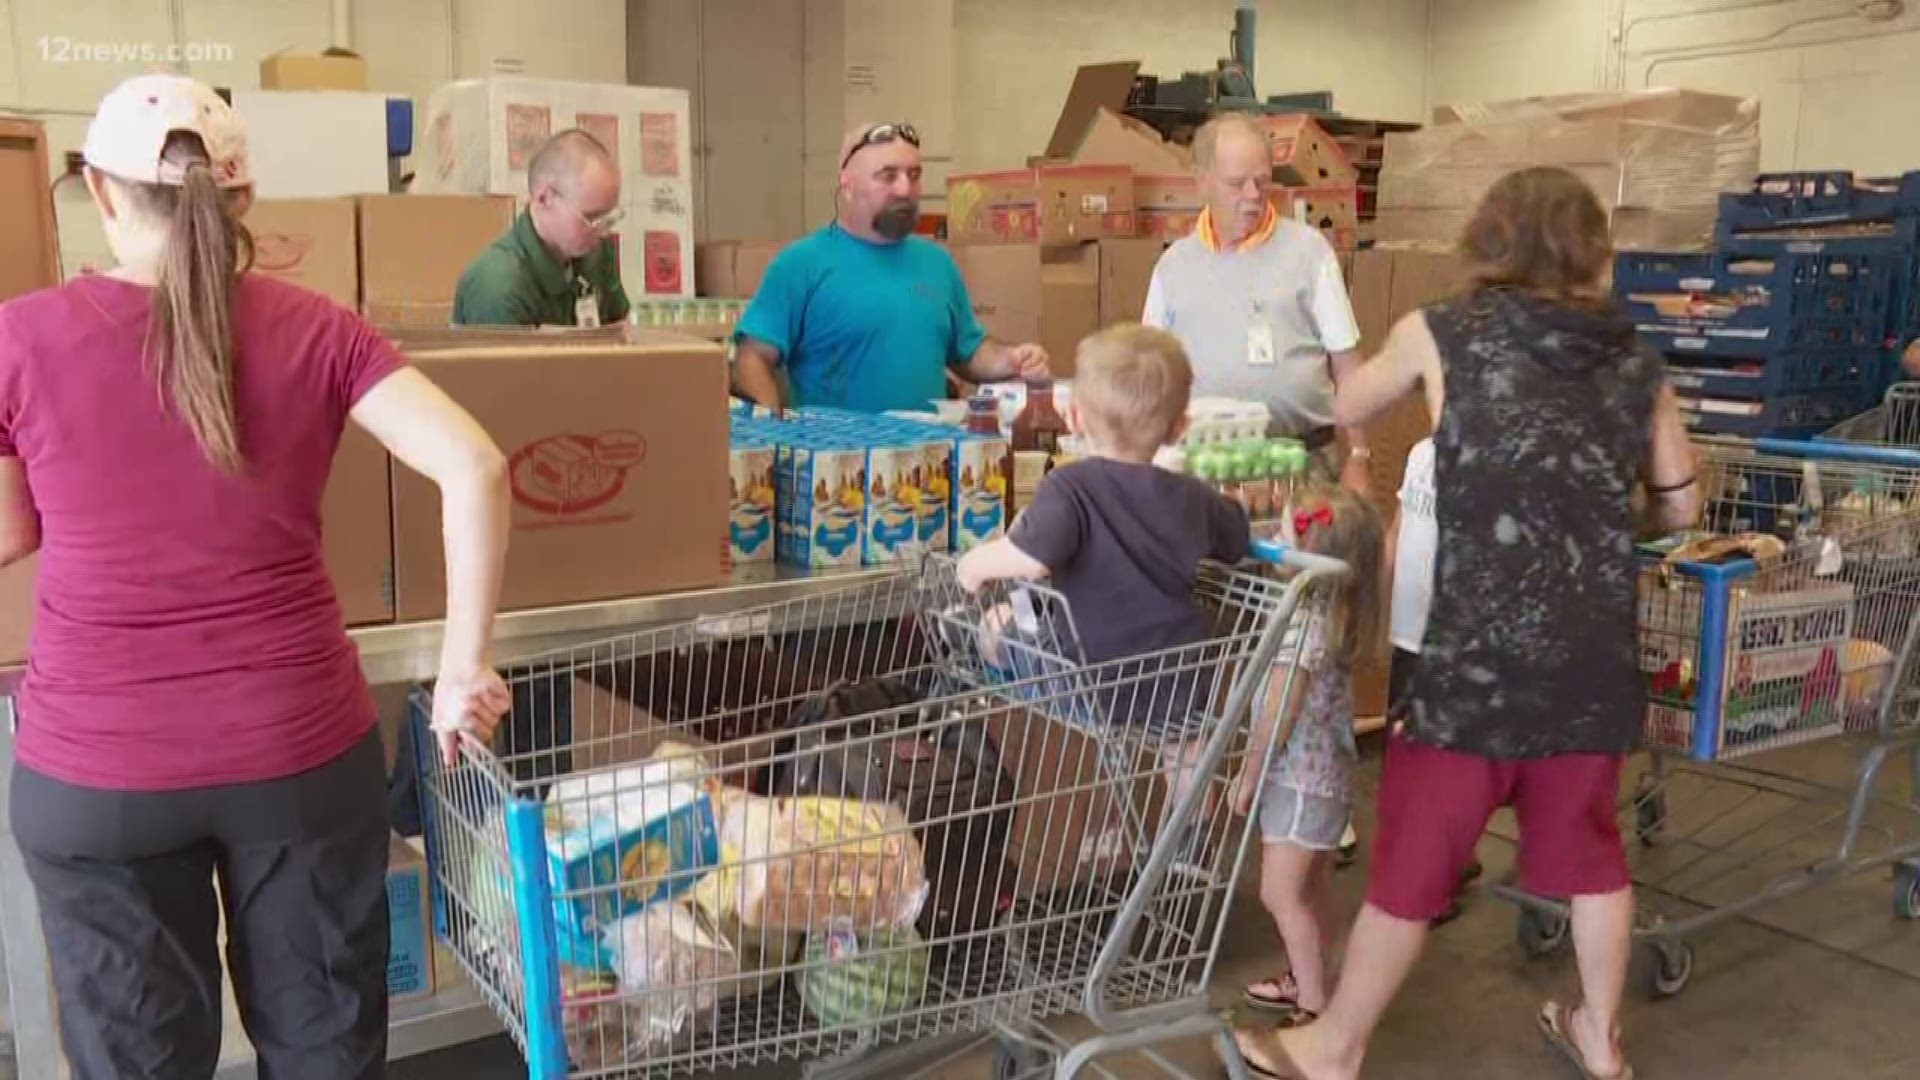 Sometimes people just need a little help in life and the United Food Bank is there to provide some Mesa residents with that help. Meet the volunteers making that happen.